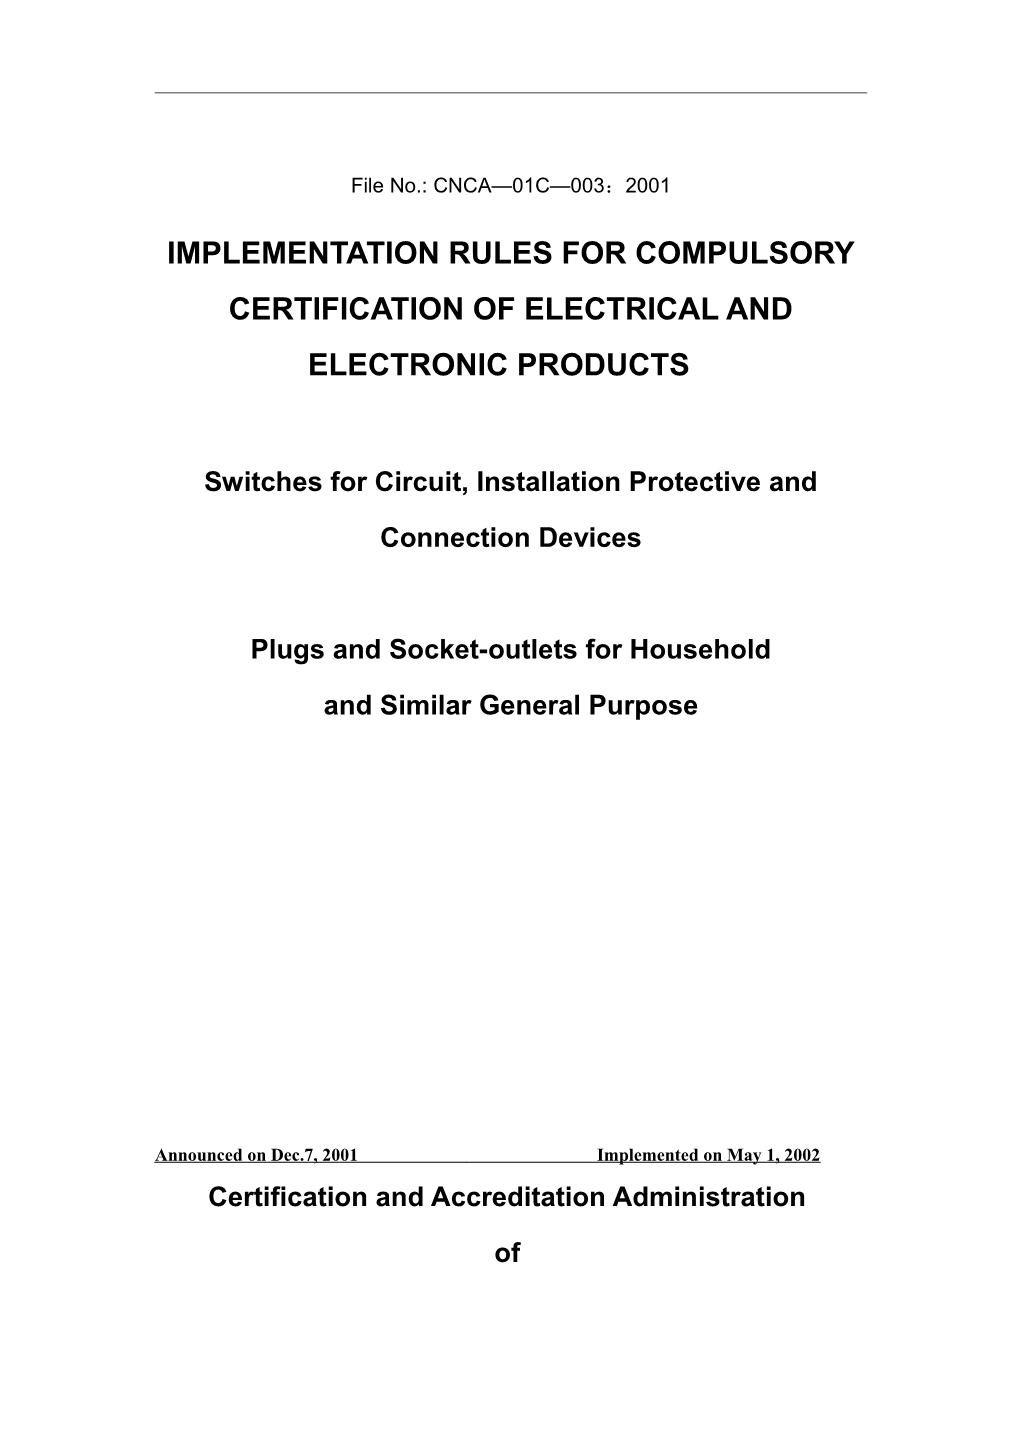 Regulations for Compulsory Certification of Household Electric Appliances